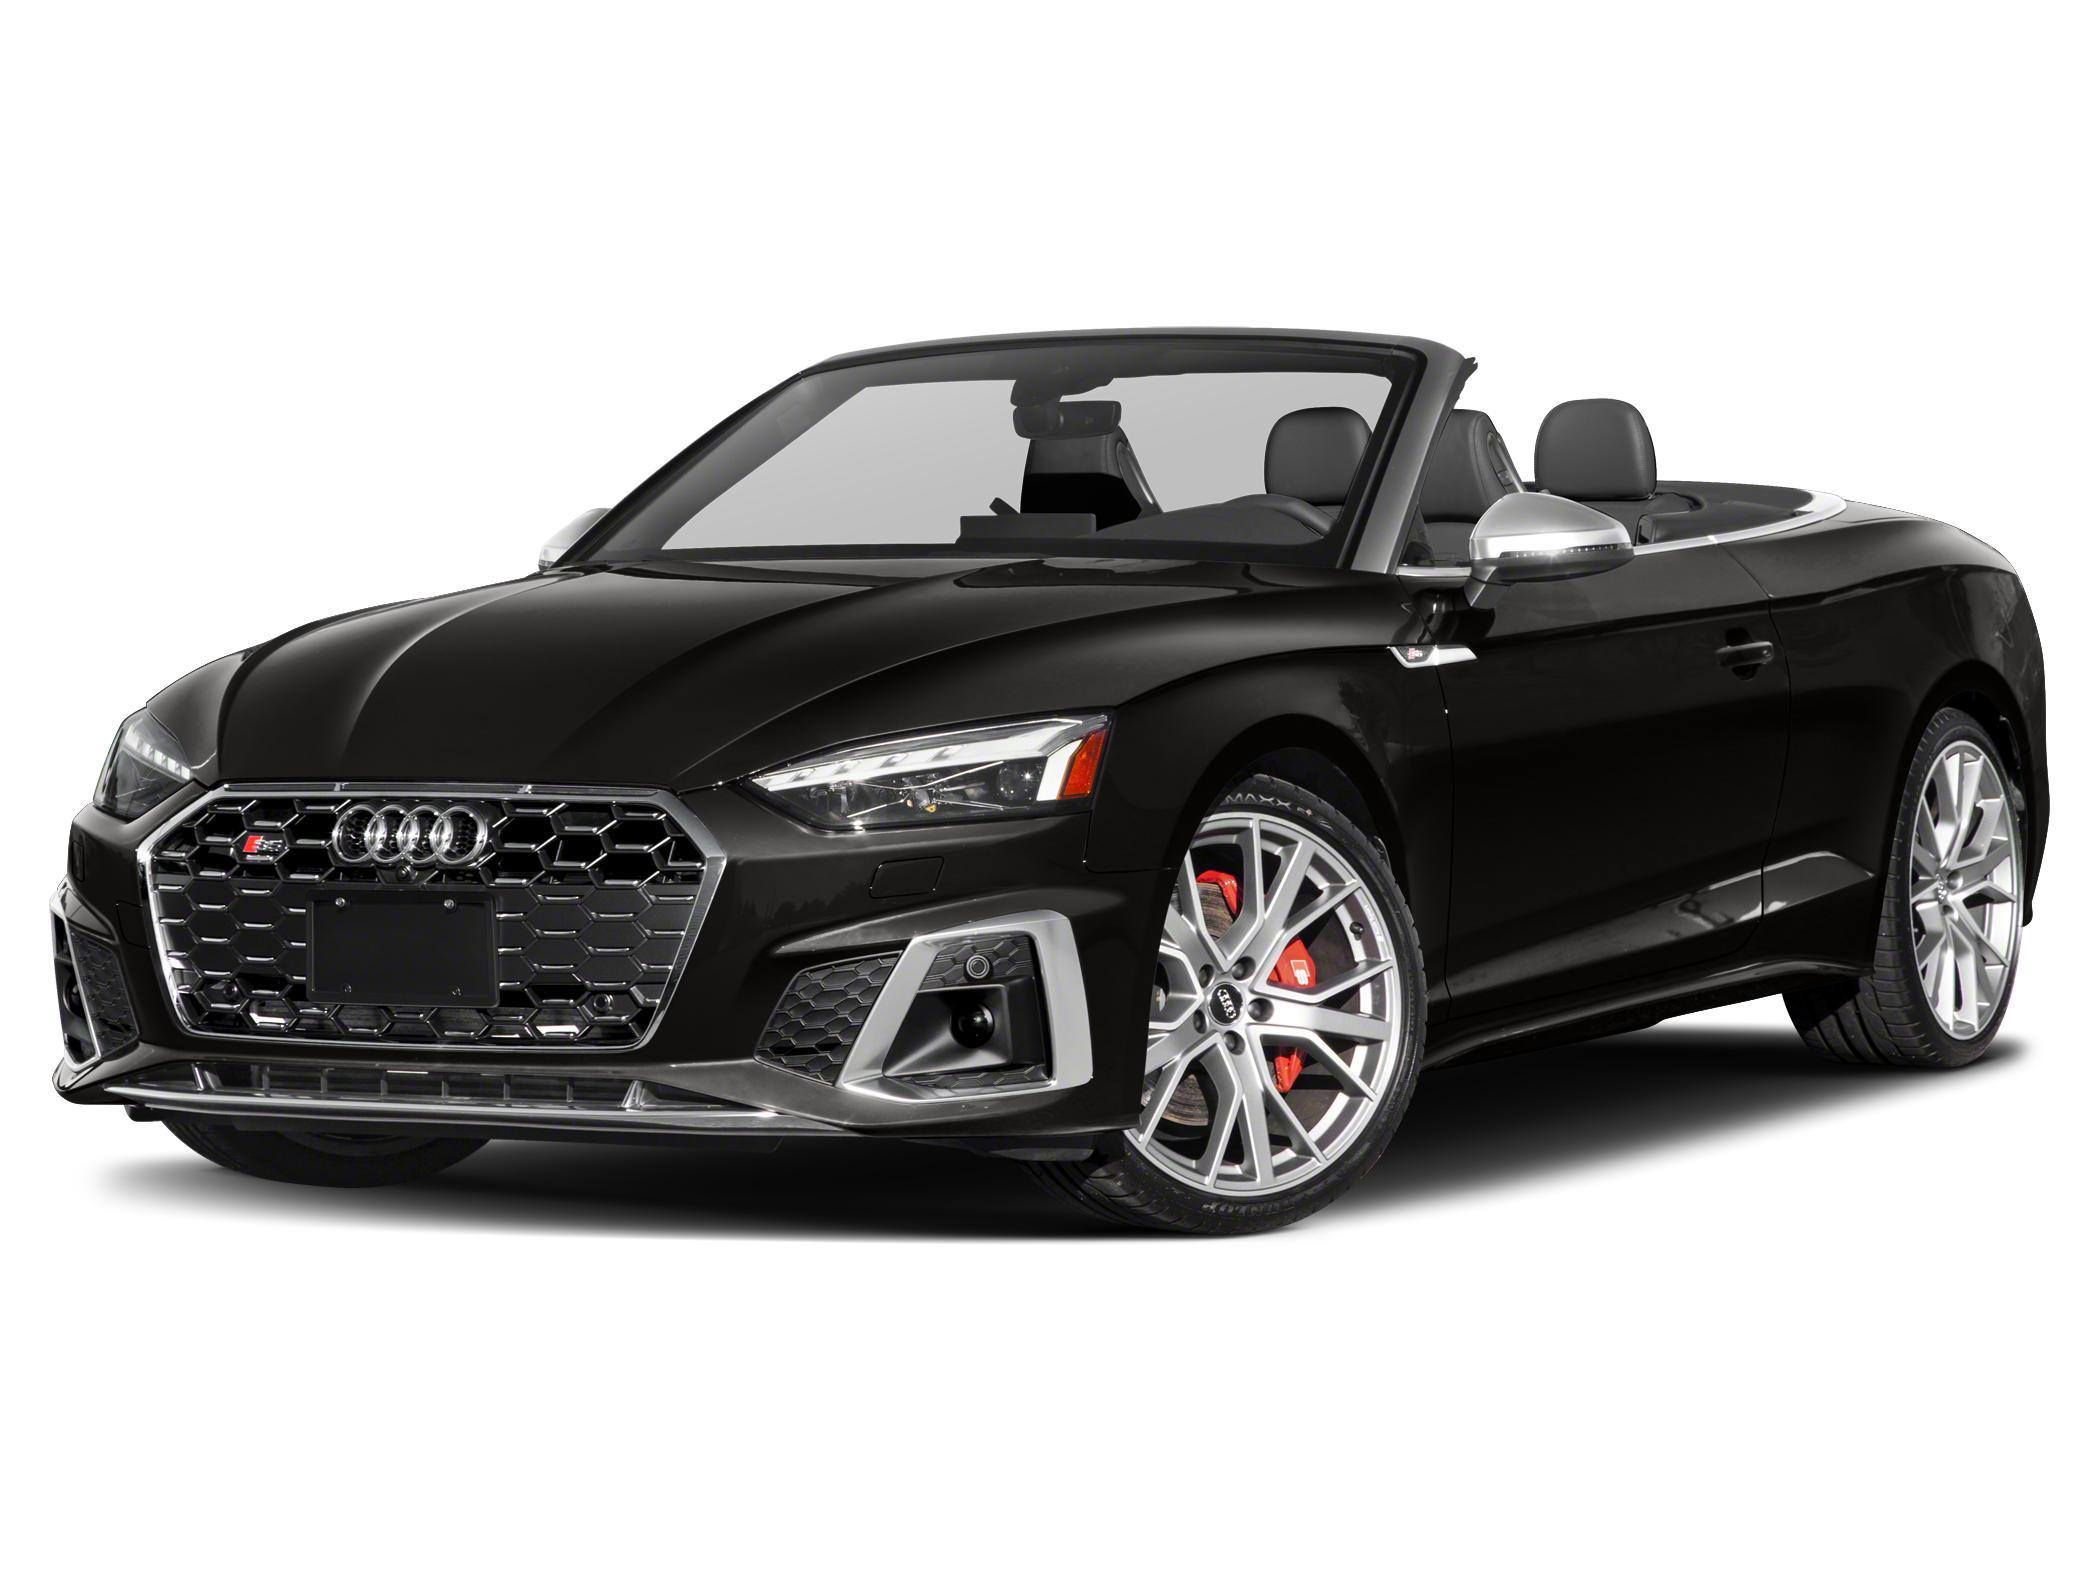 2022 Audi S5 Cabriolet Reviews, Price, MPG and More | Capital One Auto  Navigator